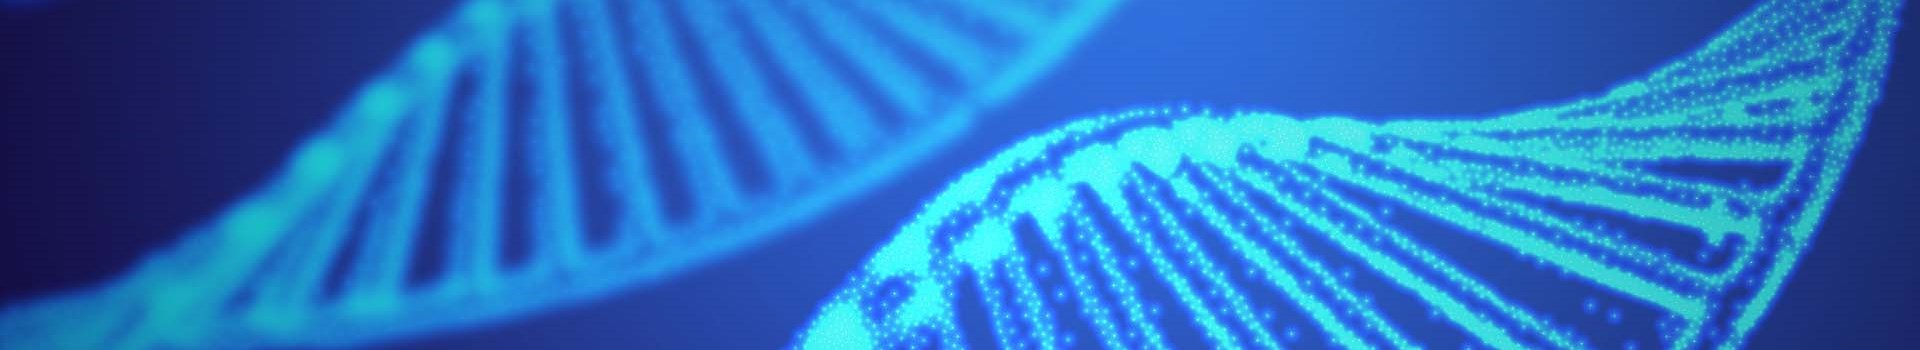 CPA welcomes gene editing consultation Header Image